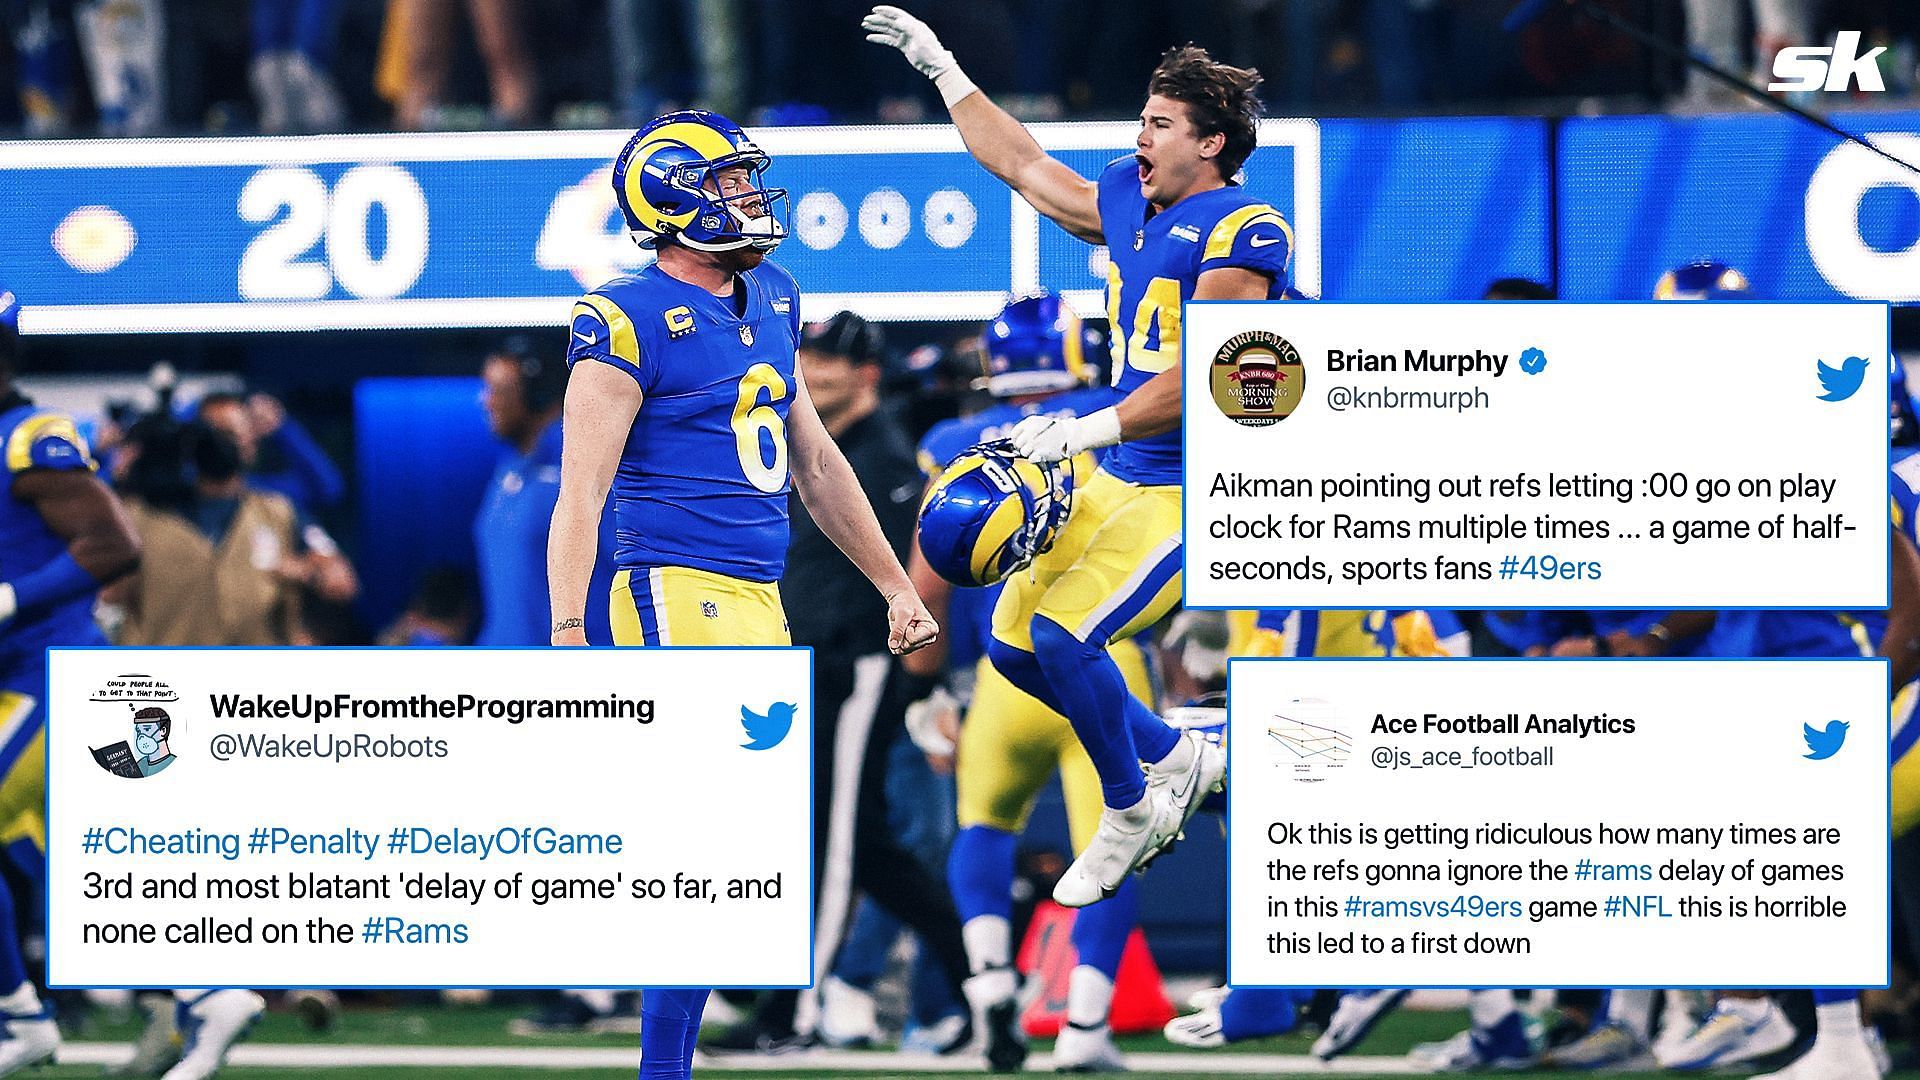 Just a few tweets that discussed lack of delay of games calls during the LA Rams vs San Francisco 49ers game